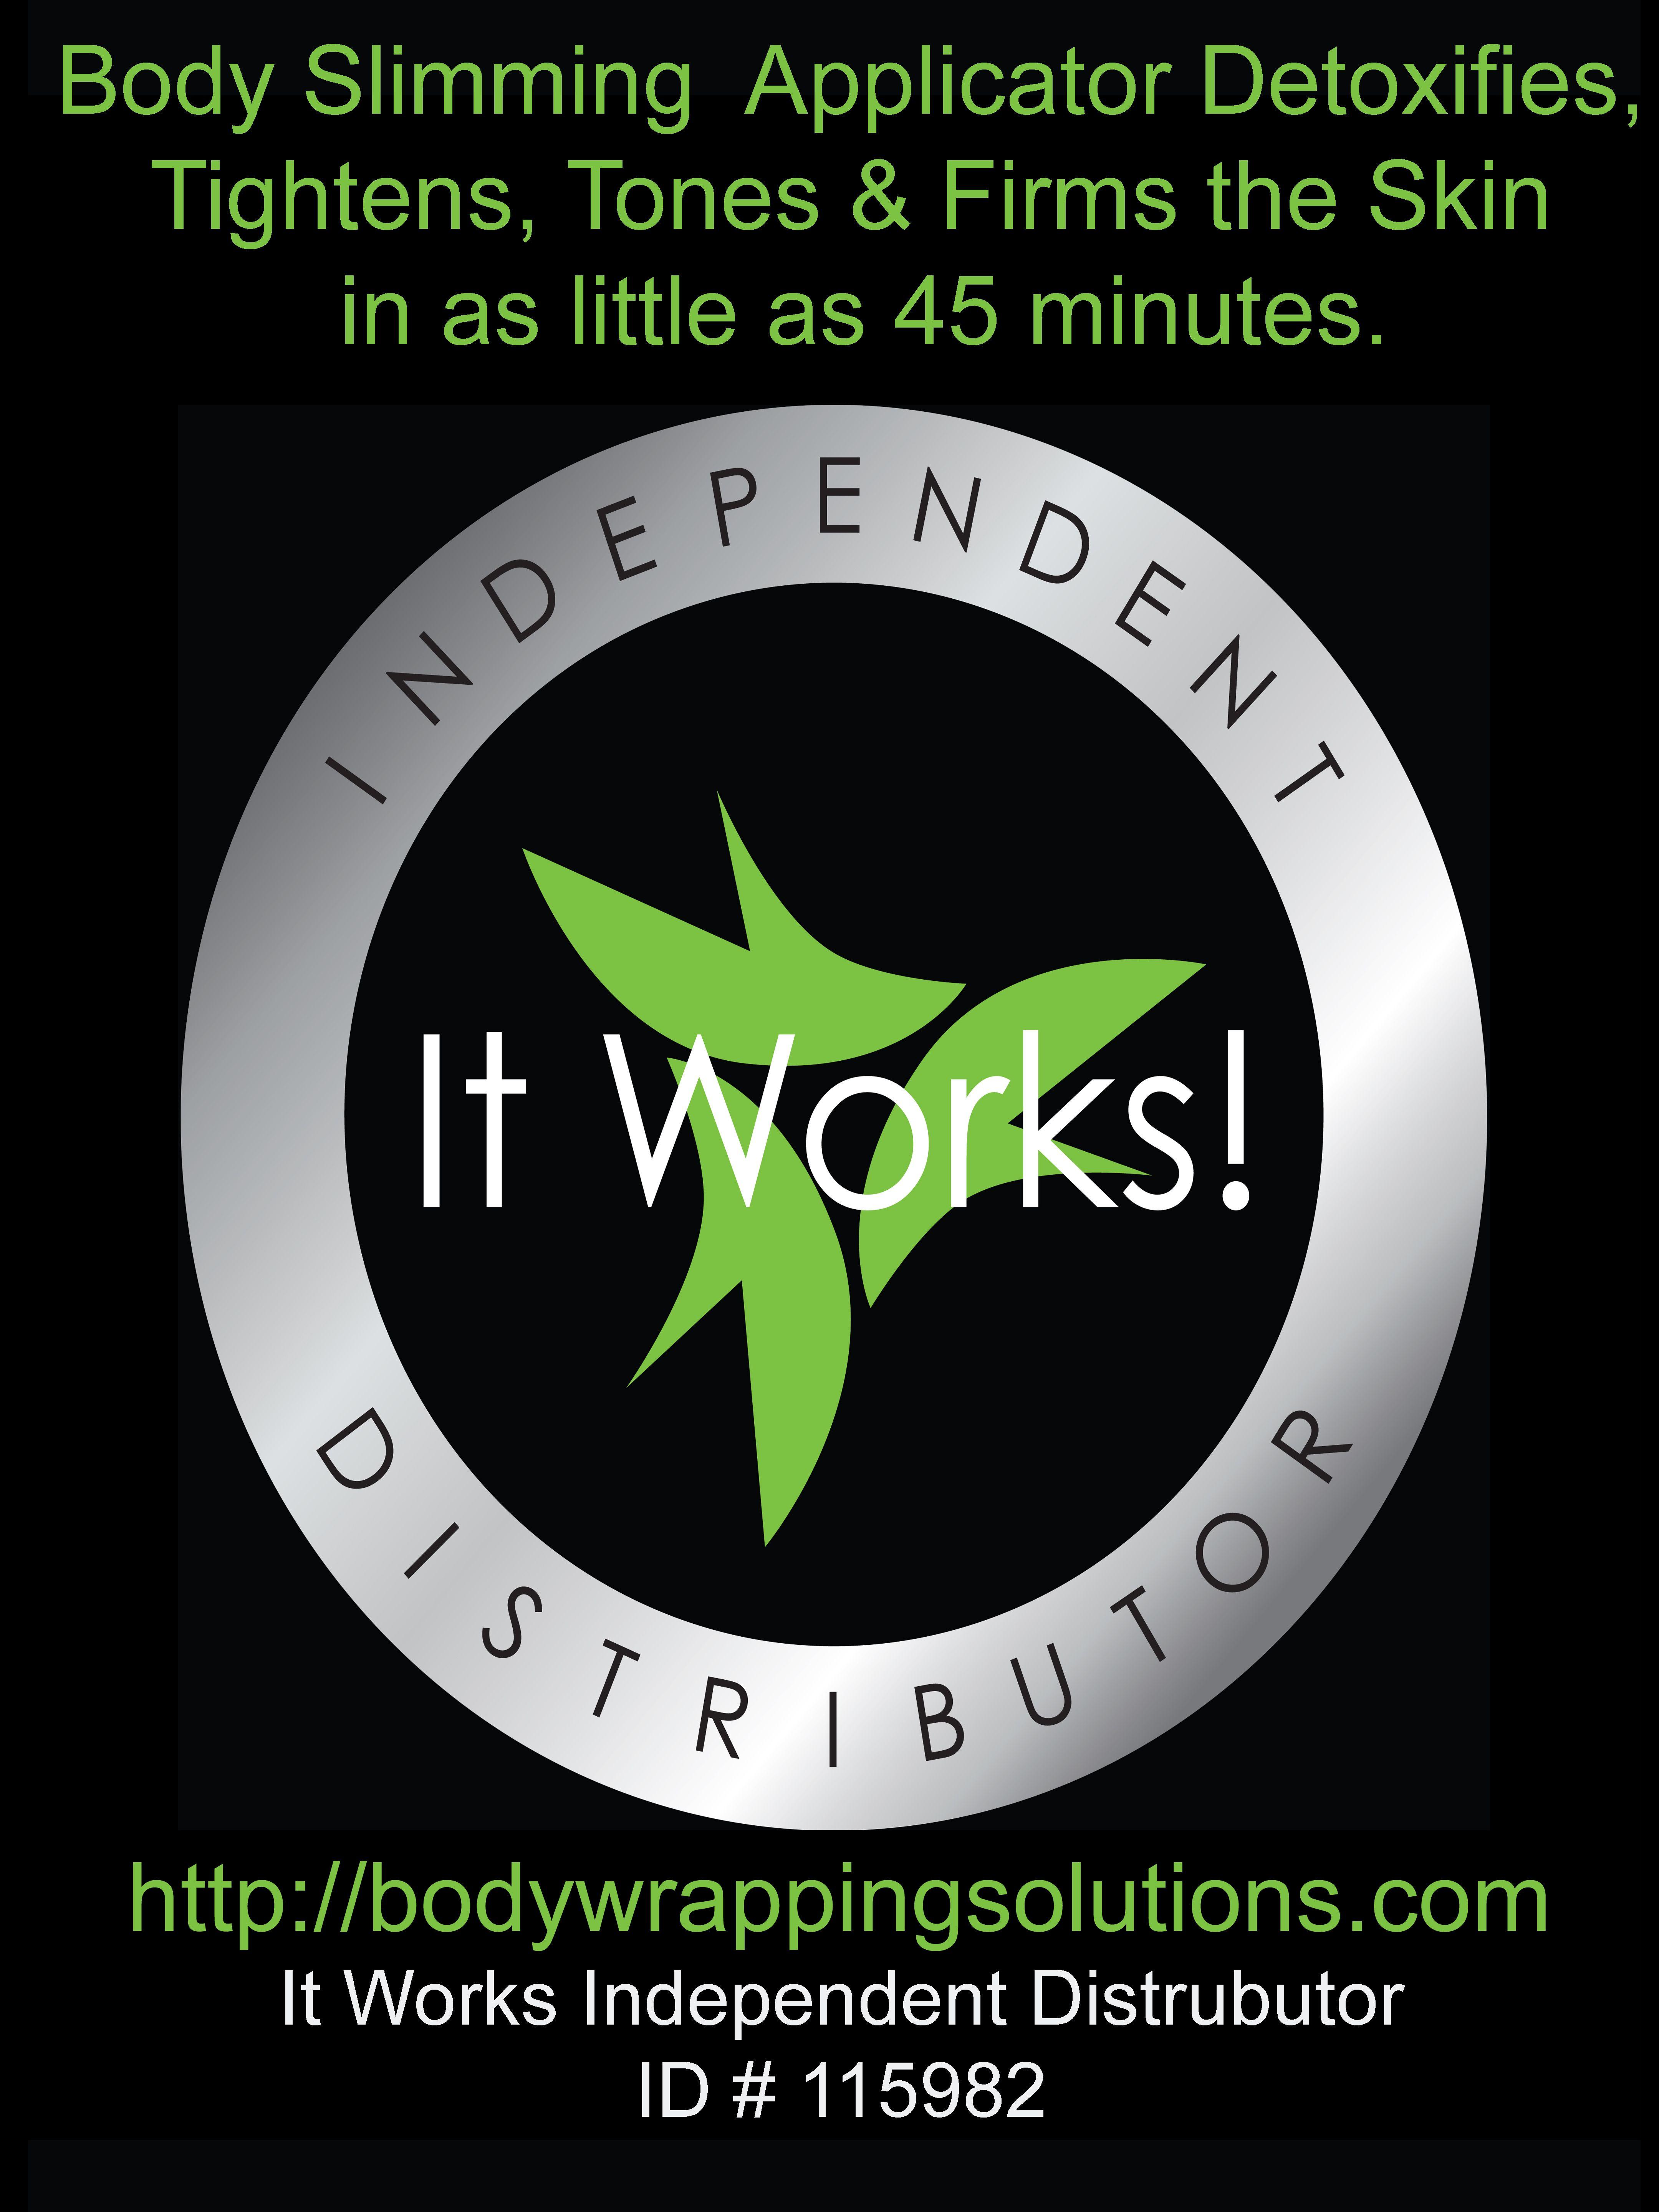 ItWorks Global Logo - Pin by Lexi Finger on Things I like | Pinterest | It works global ...